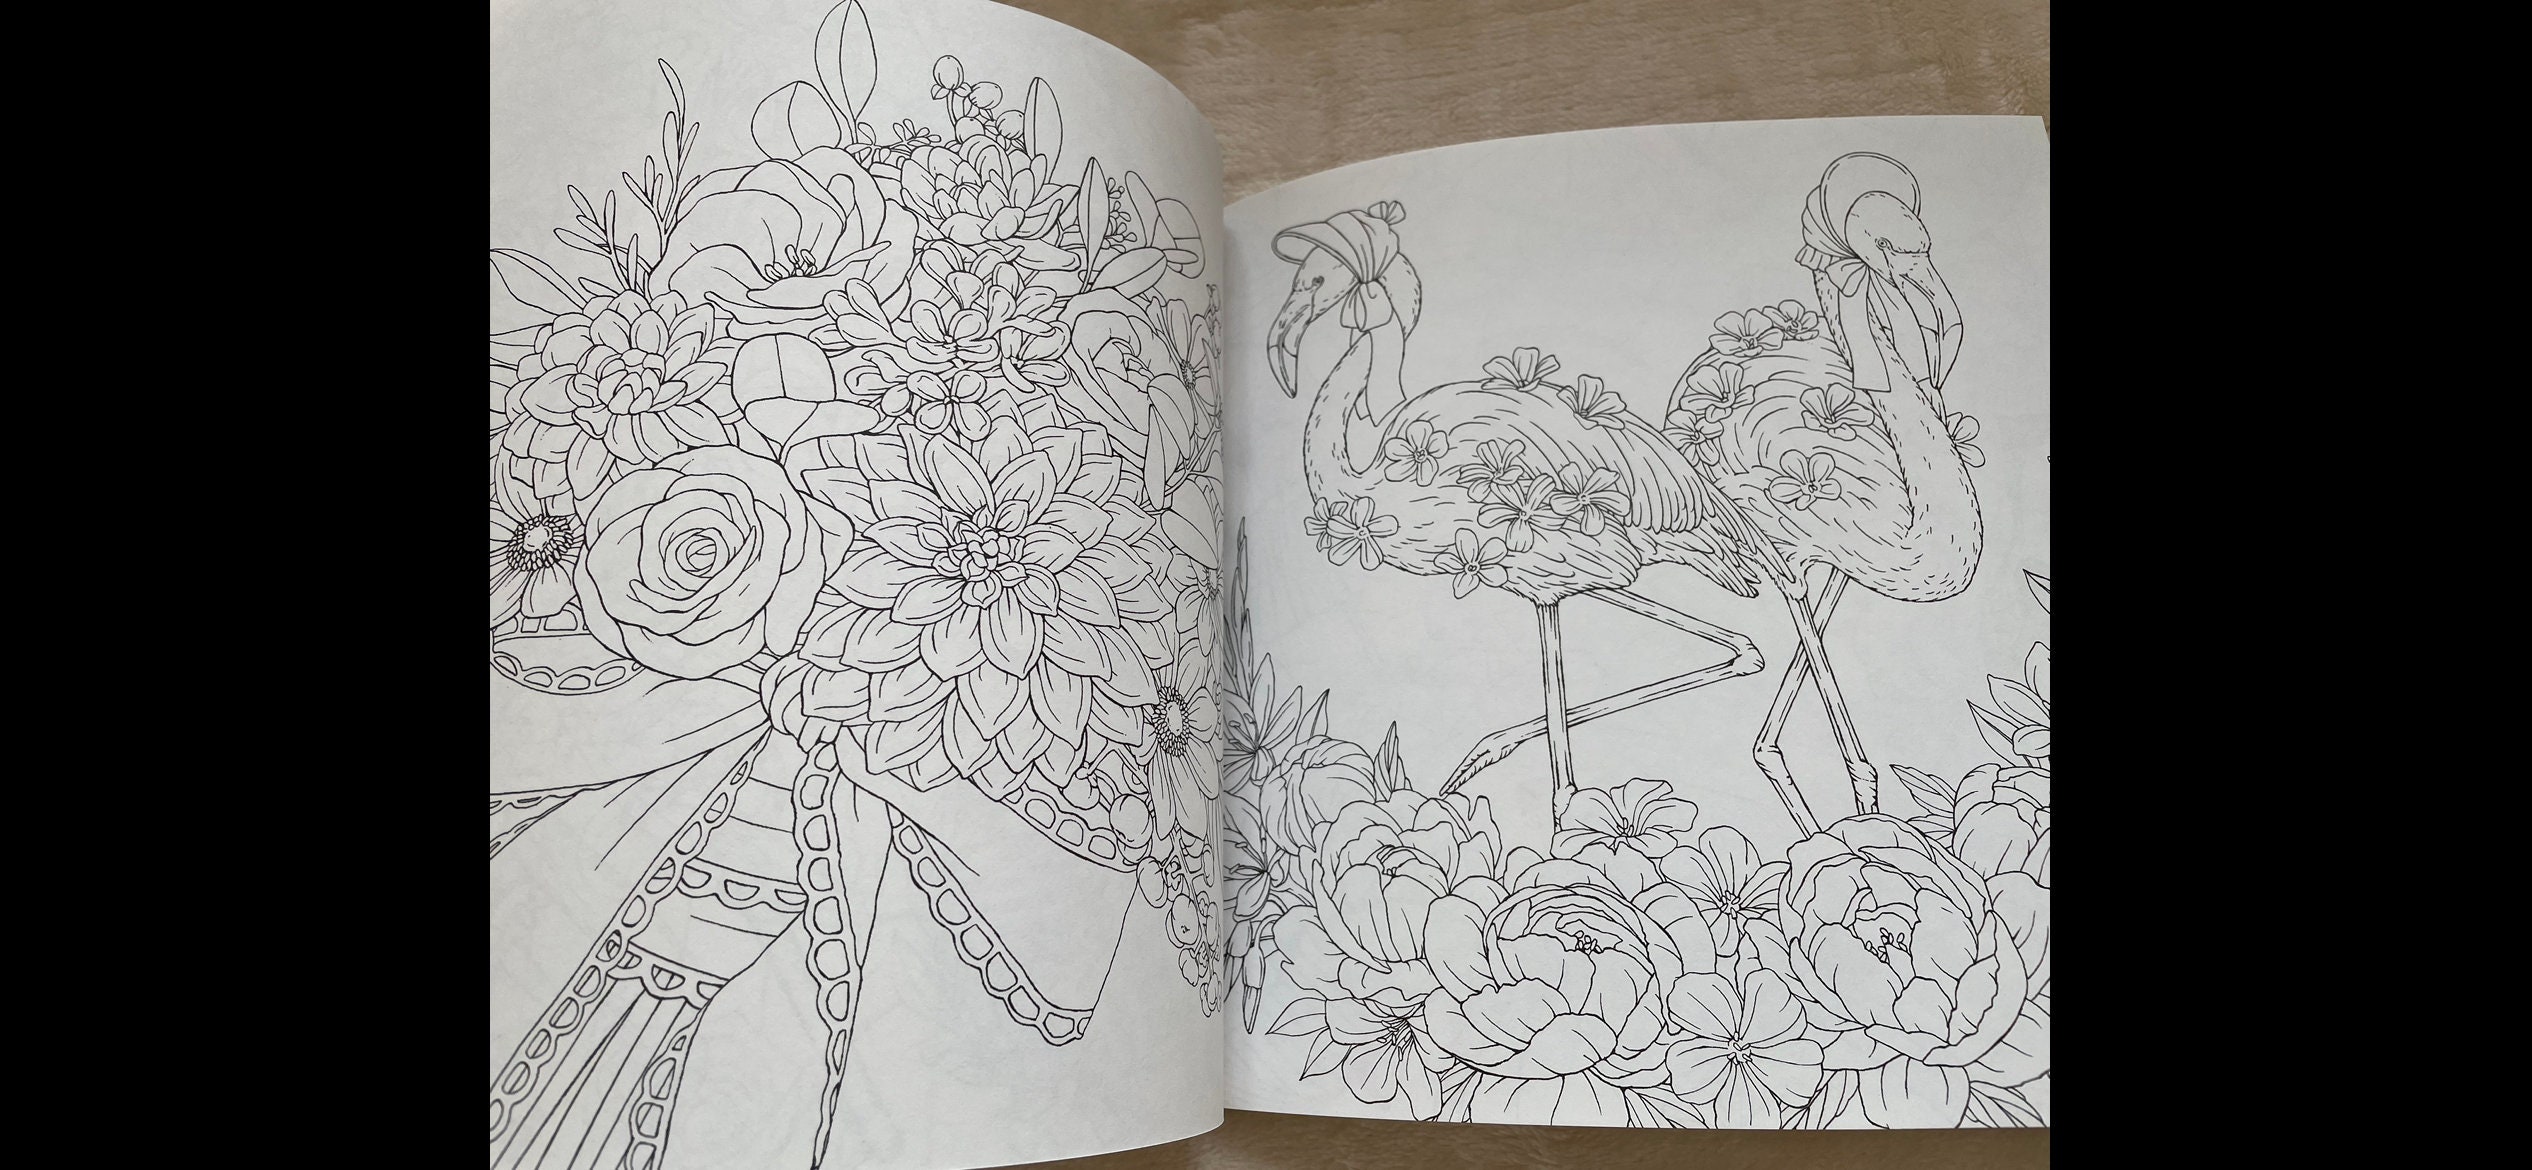 Symphony of Cute Animals: A Curious Coloring Book Adventure [Book]